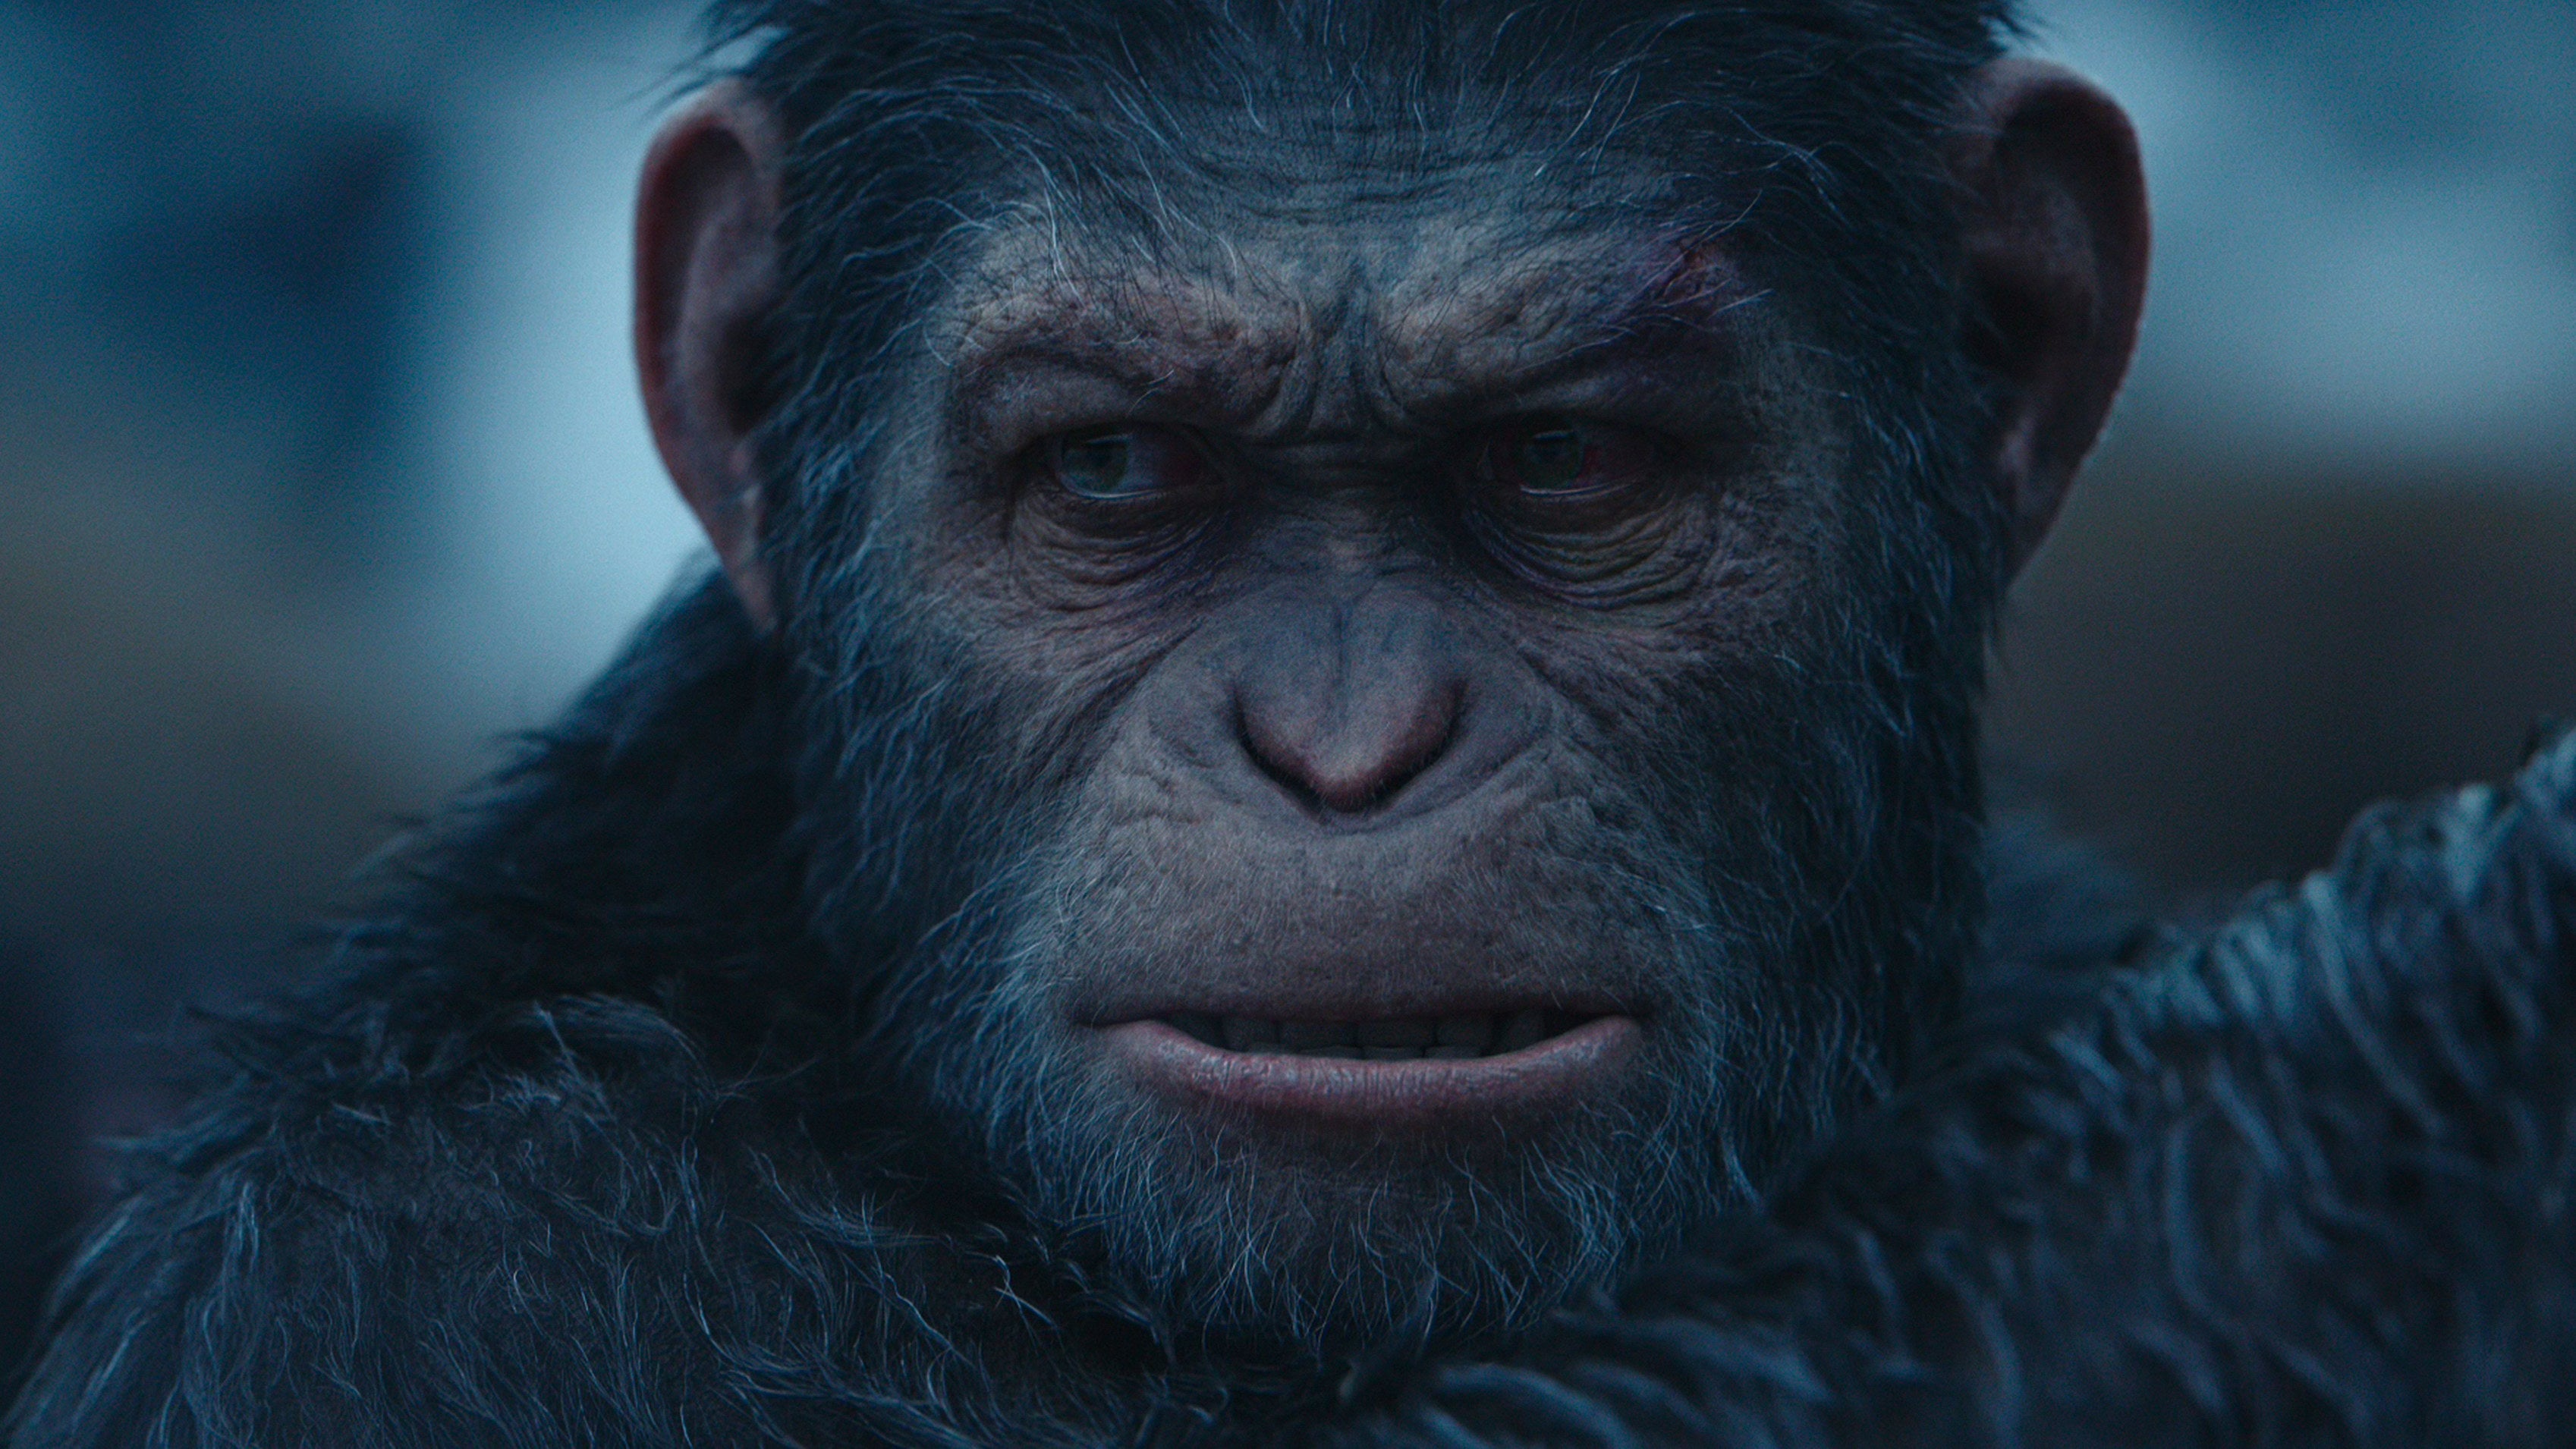 A cheeky monkey in a frame from War for the Planet of the Apes.